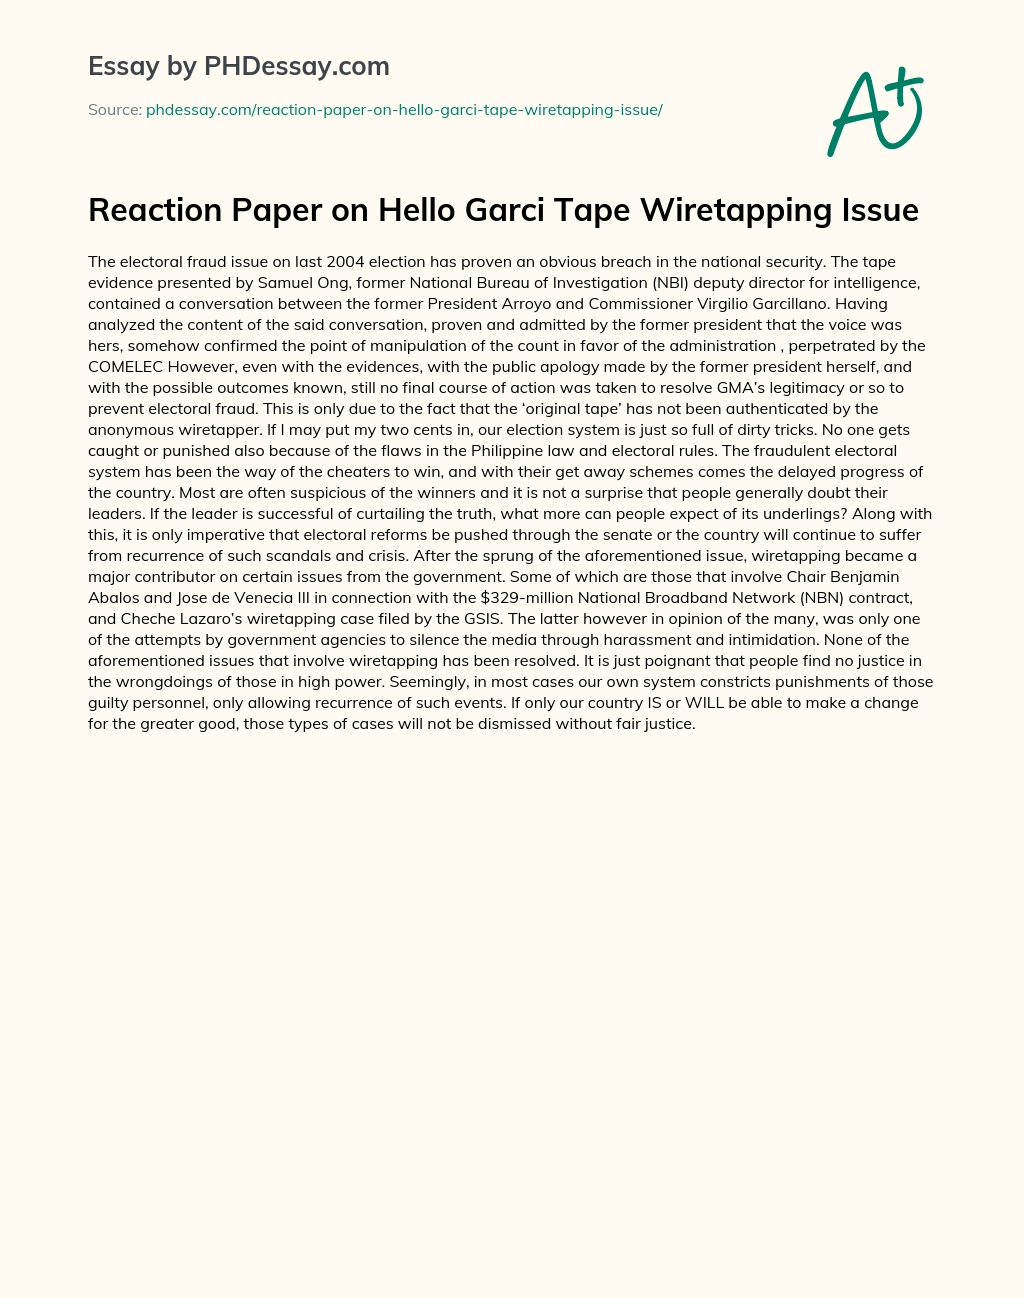 Reaction Paper on Hello Garci Tape Wiretapping Issue essay